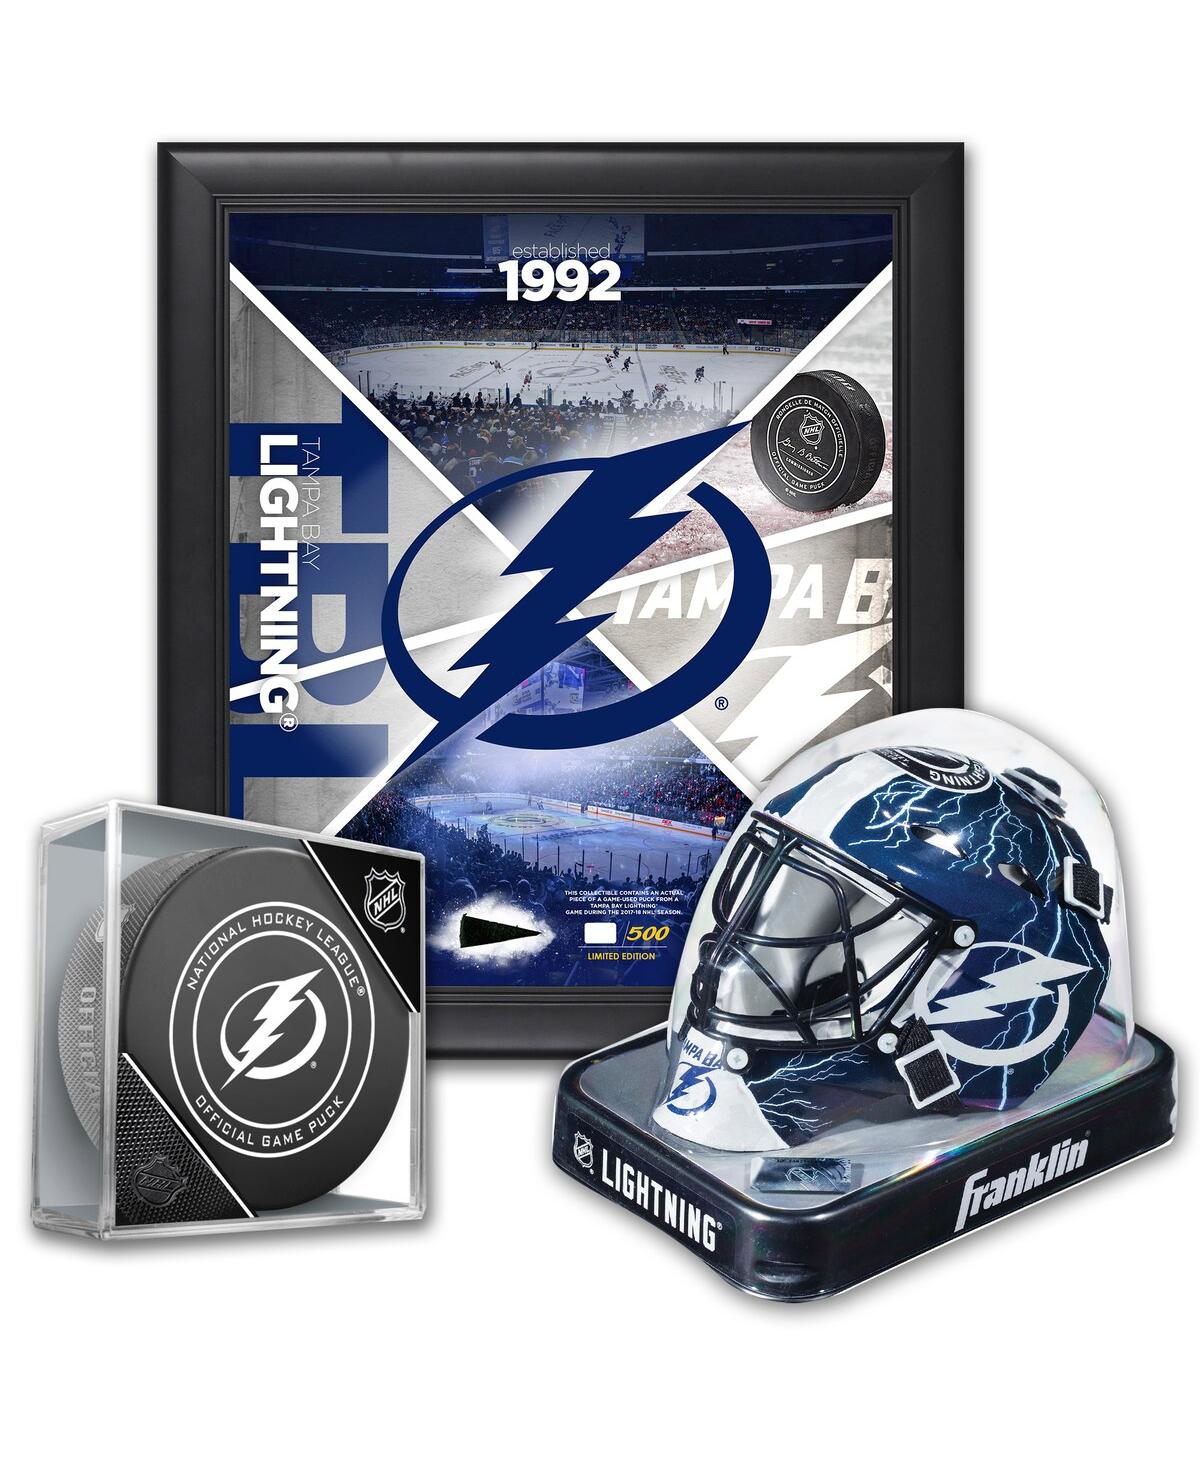 Tampa Bay Lightning Ultimate Fan Collectibles Bundle - Includes Team Impact 15" x 17" Frame Mini Goalie Mask and Official Game Puck - Multi